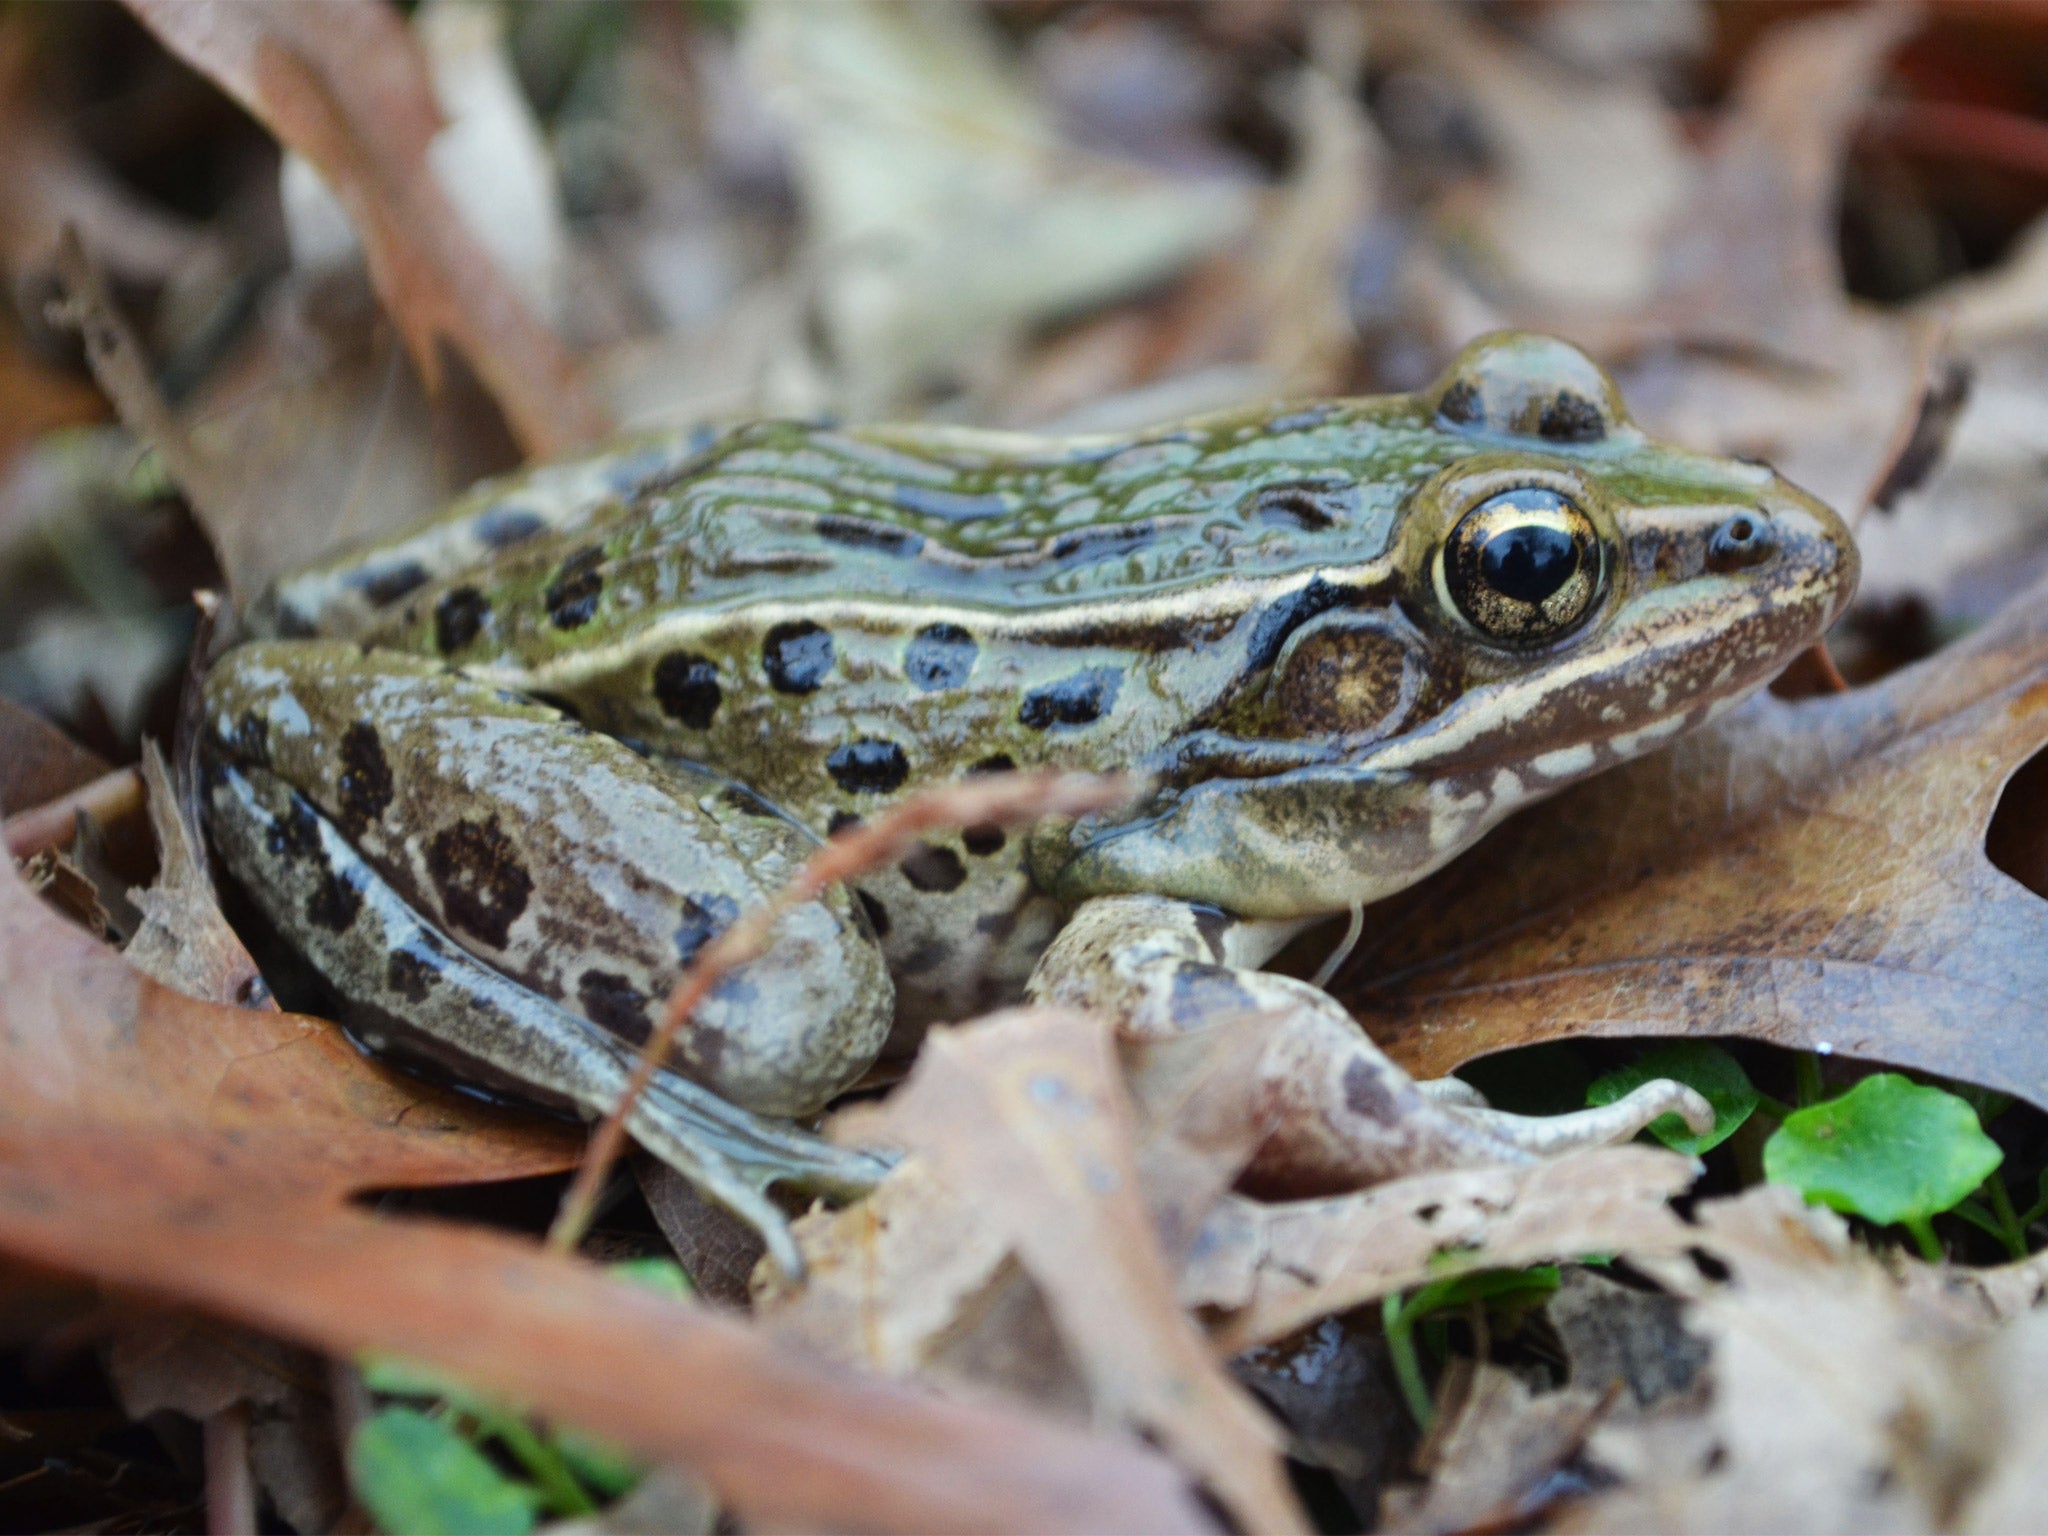 The new species of leopard frog has been named Rana kauffeldi, in honour of ecologist Carl Kauffeld who first noticed it more than a half century ago